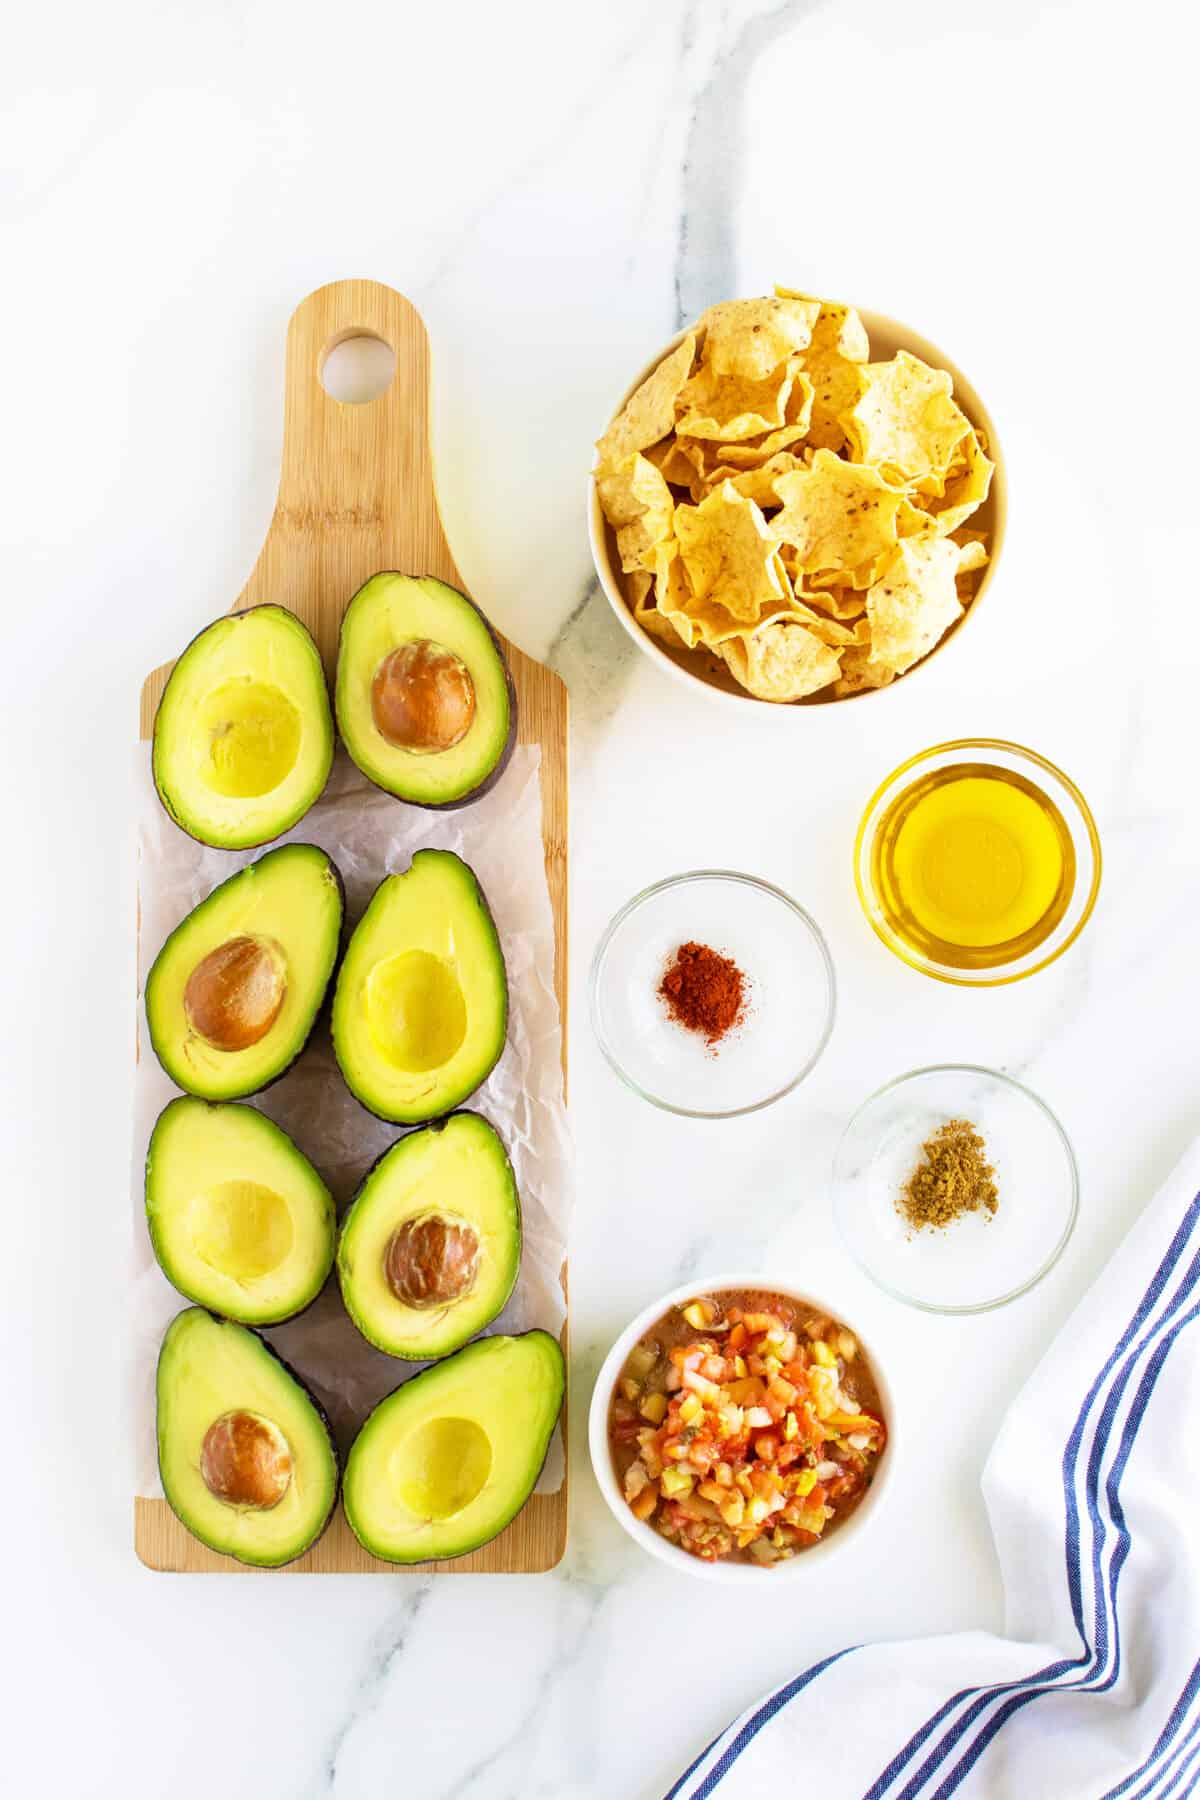 Grilled Avocado ingredients in small bowls